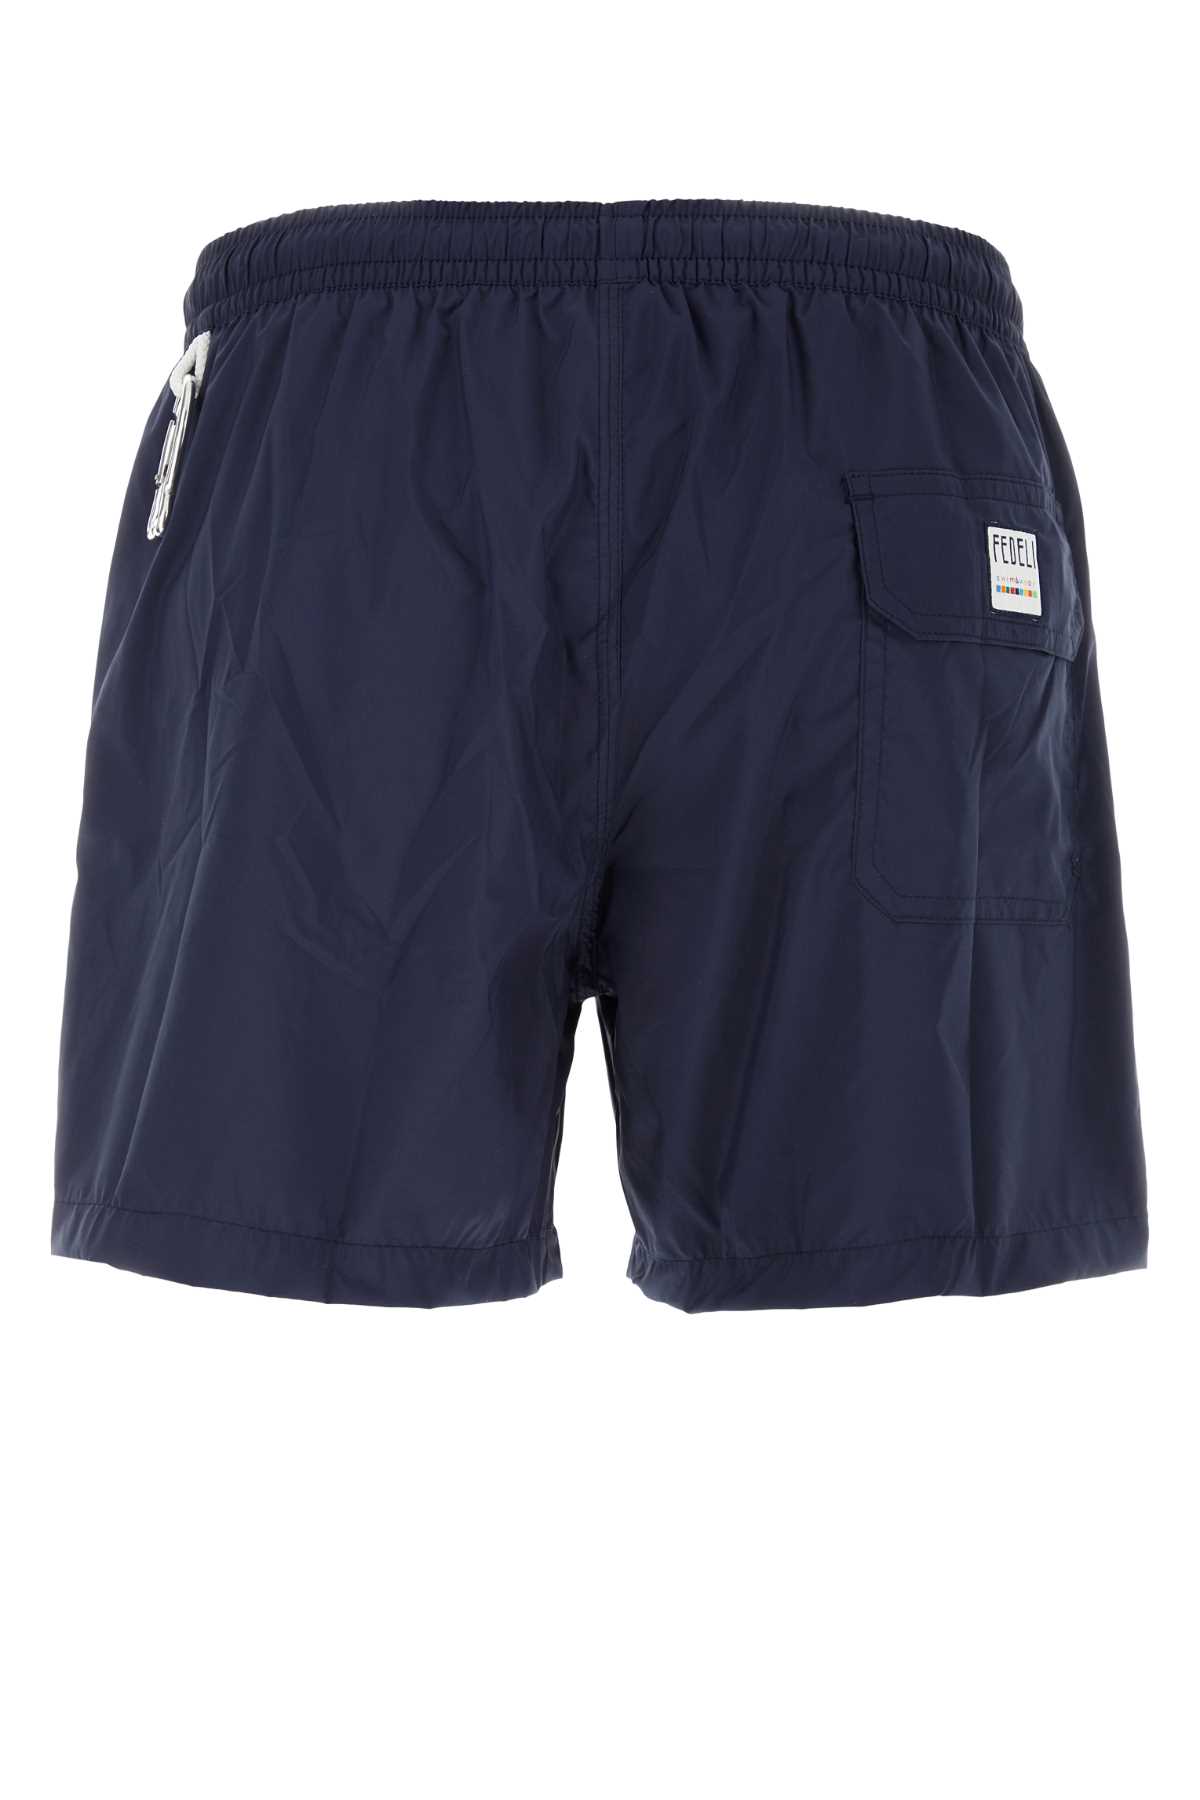 Shop Fedeli Midnight Blue Polyester Swimming Shorts